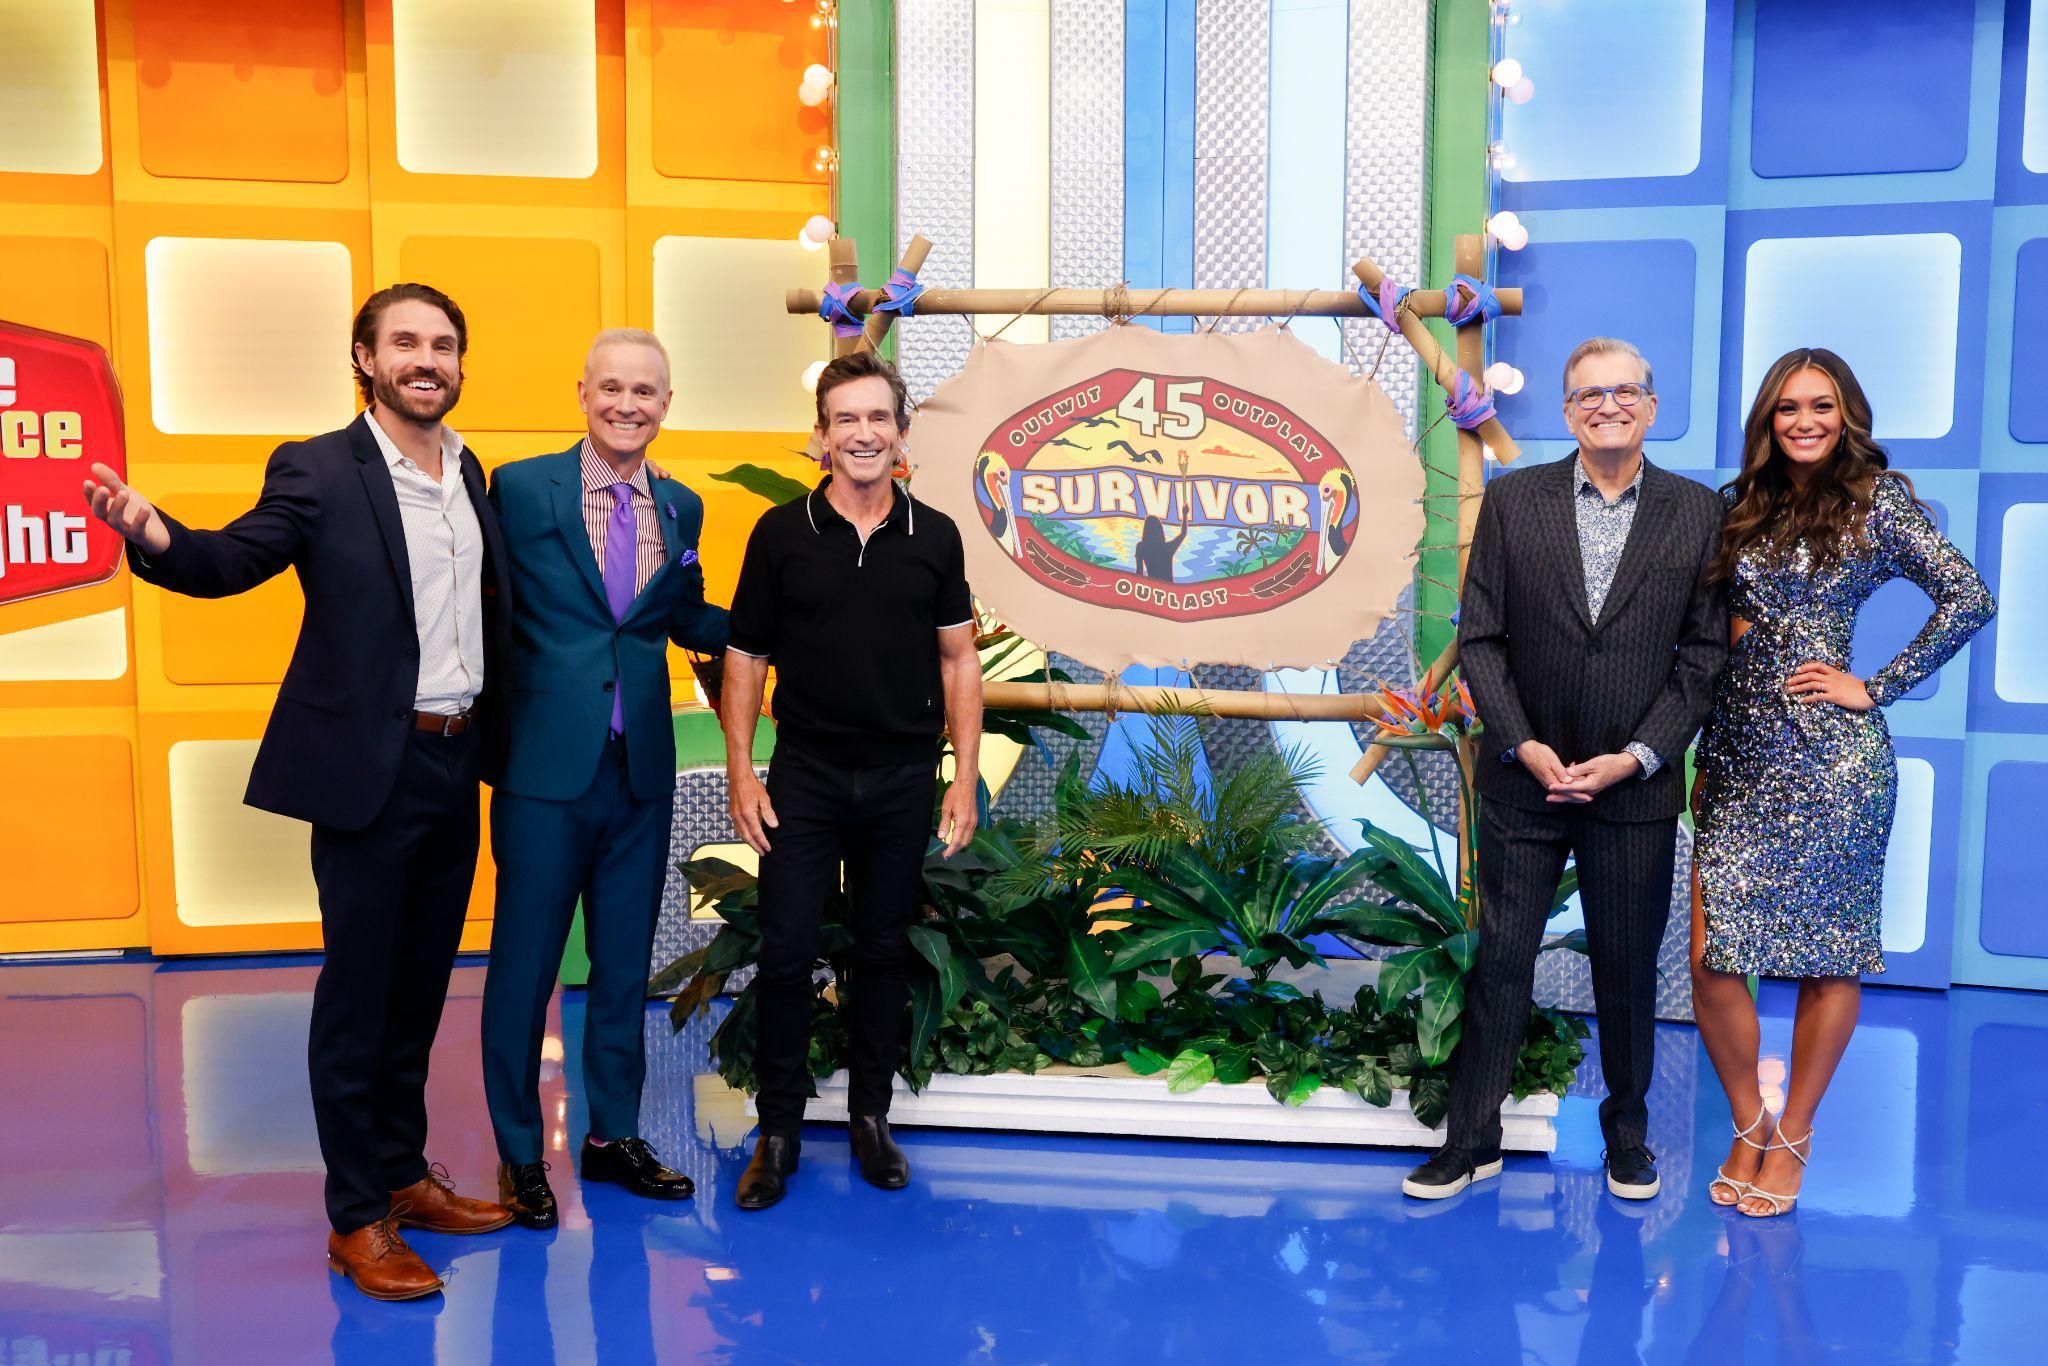 The Price is Right at Night and Let’s Make a Deal Primetime Hit CBS as Hollywood Strike Rages On